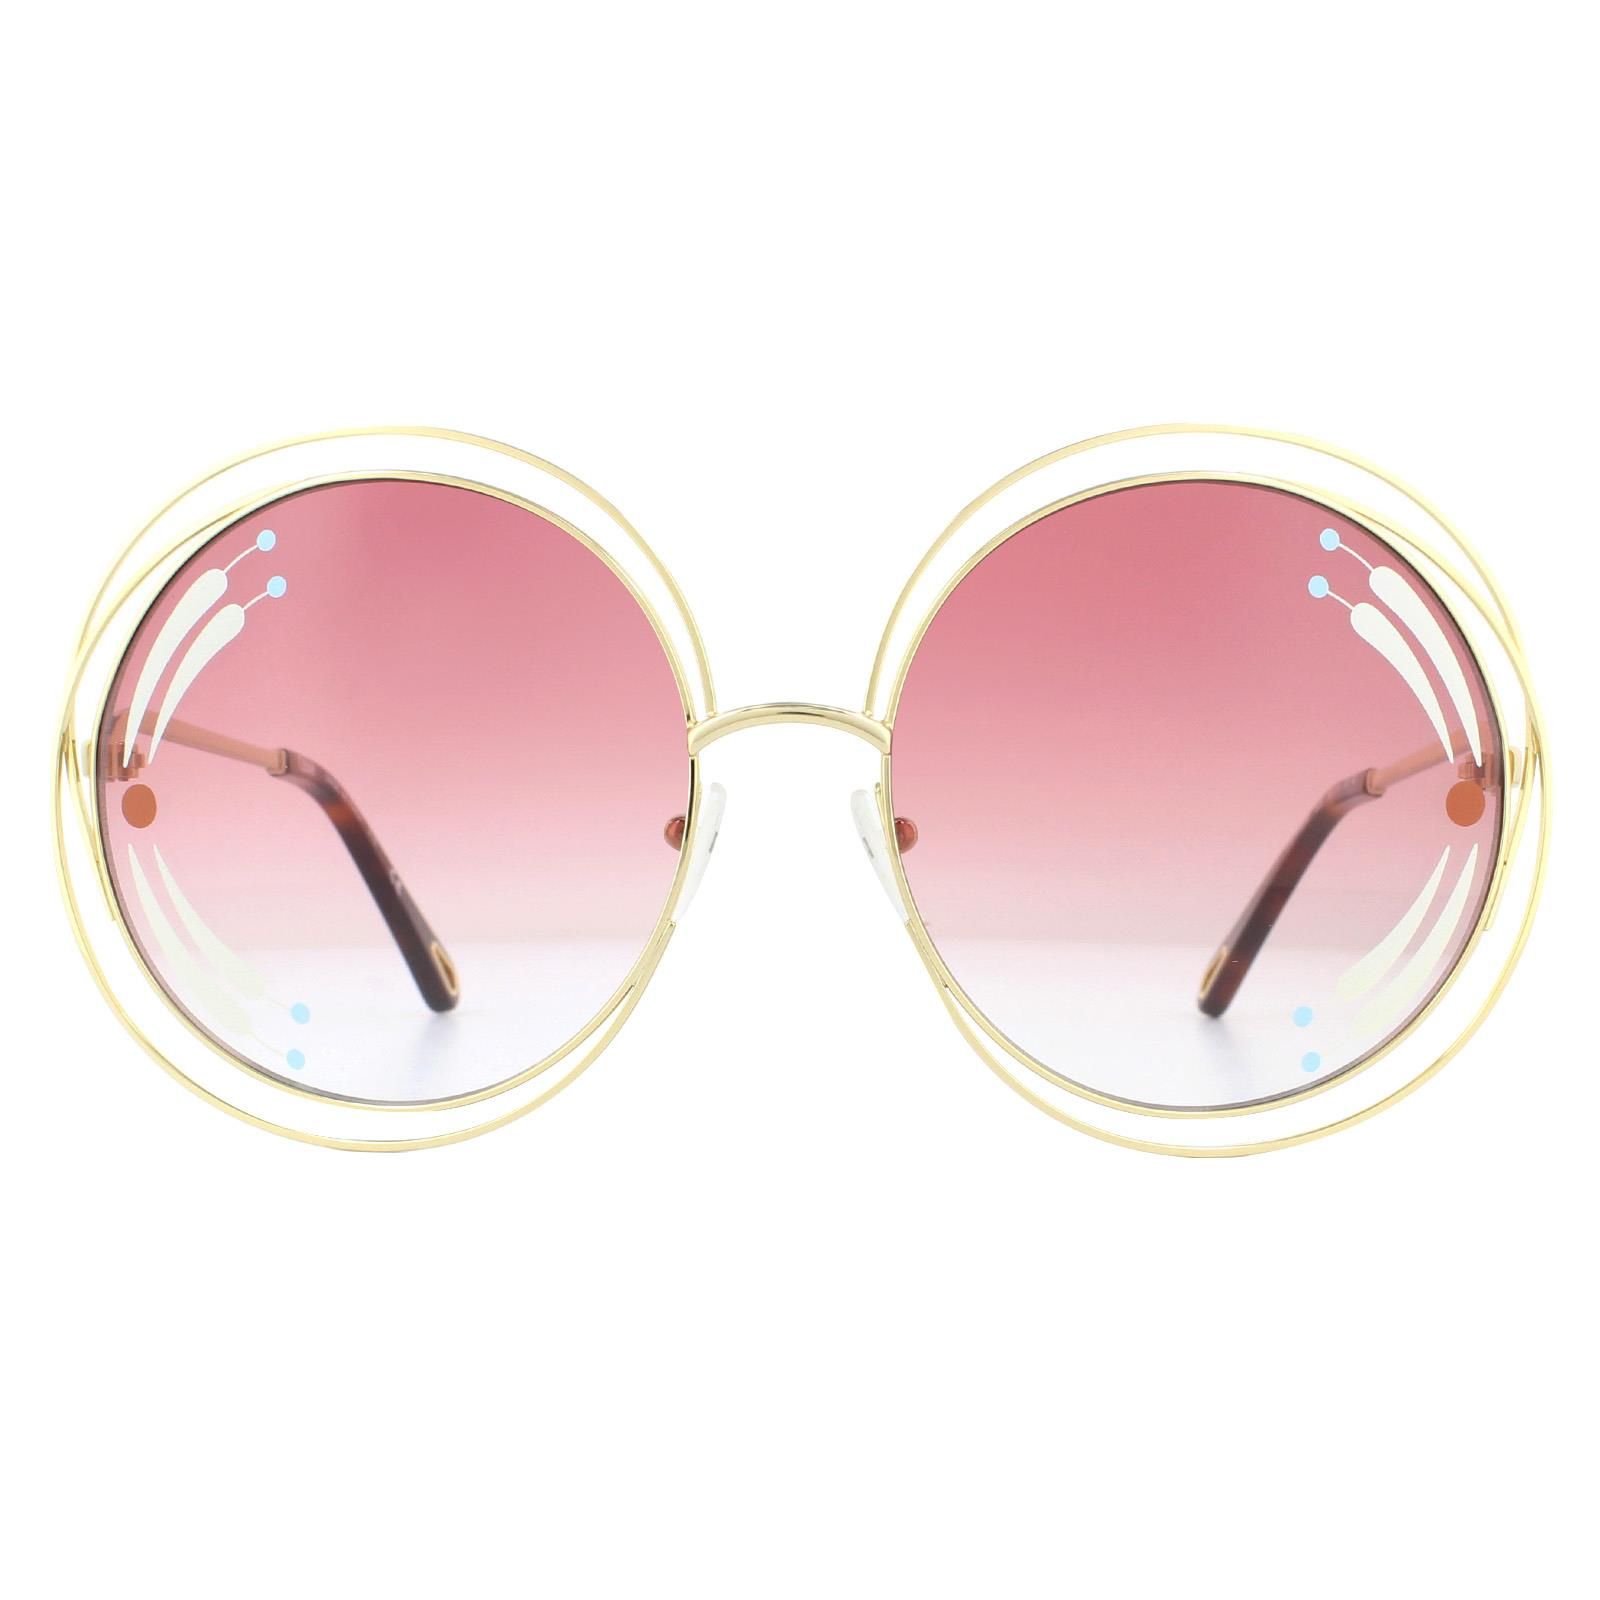 Chloe Sunglasses Carlina CE114SRI 835 Gold Havana Burgundy Gradient are an oversized round style with a sculptural wired frame, embellished lenses and temples etched with the Chloe logo.